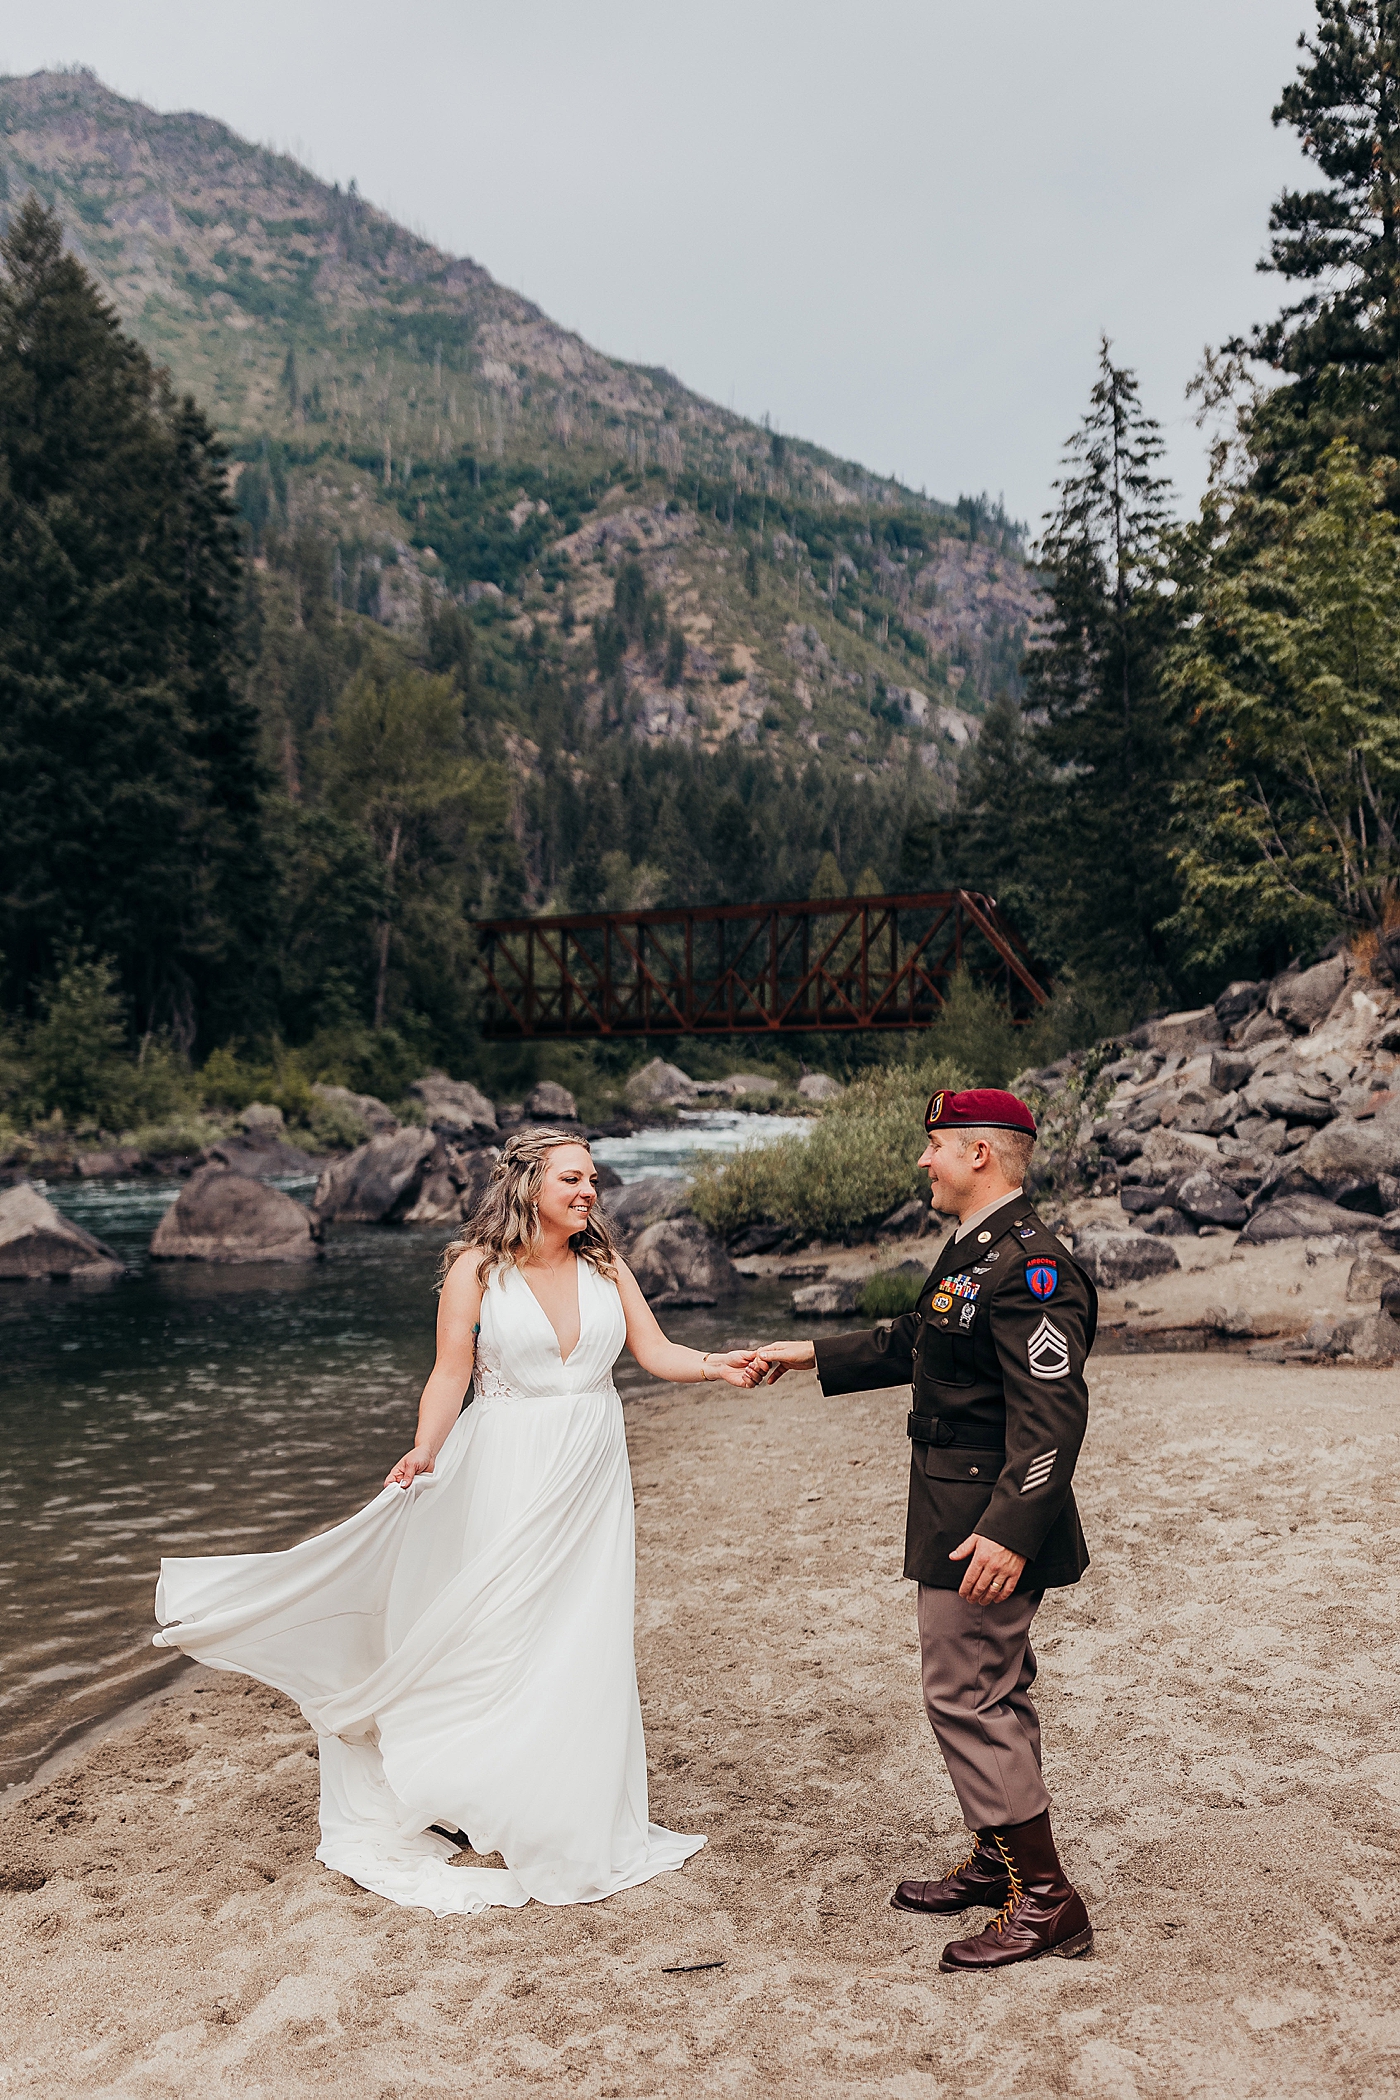 Newlyweds dancing along the water. Photo by Megan Montalvo Photography.